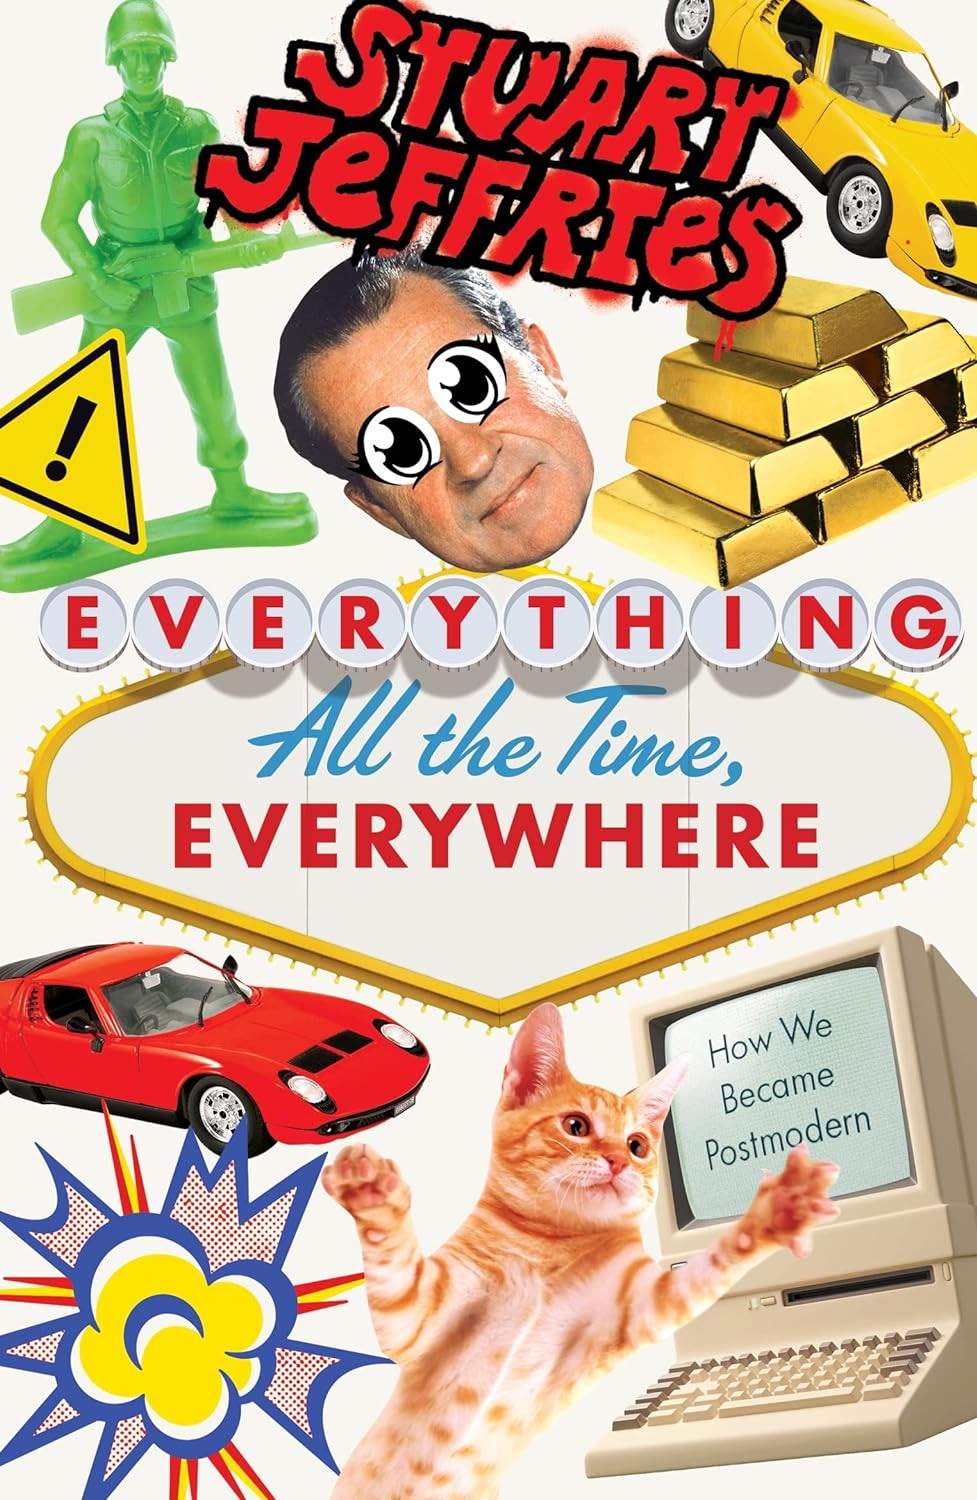 Everything, All the Time, Everywhere: How We Became Postmodern politics